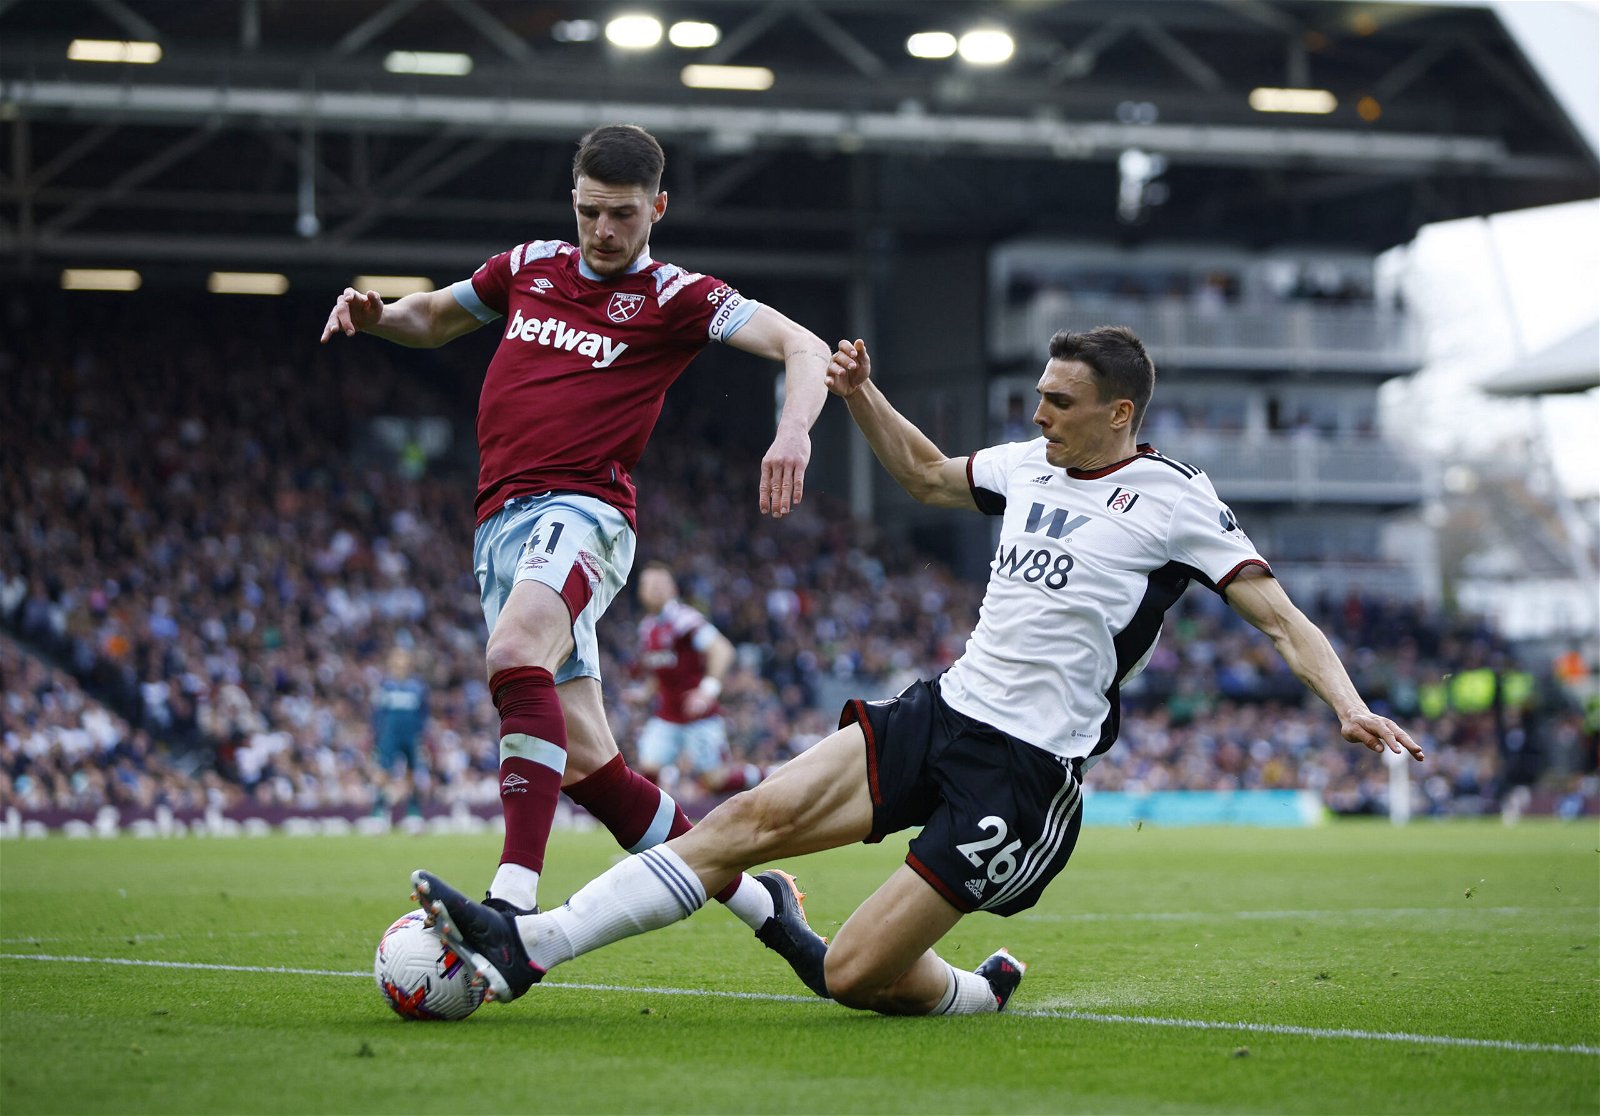 West Ham United's Declan Rice in action with Fulham's Joao Palhinha